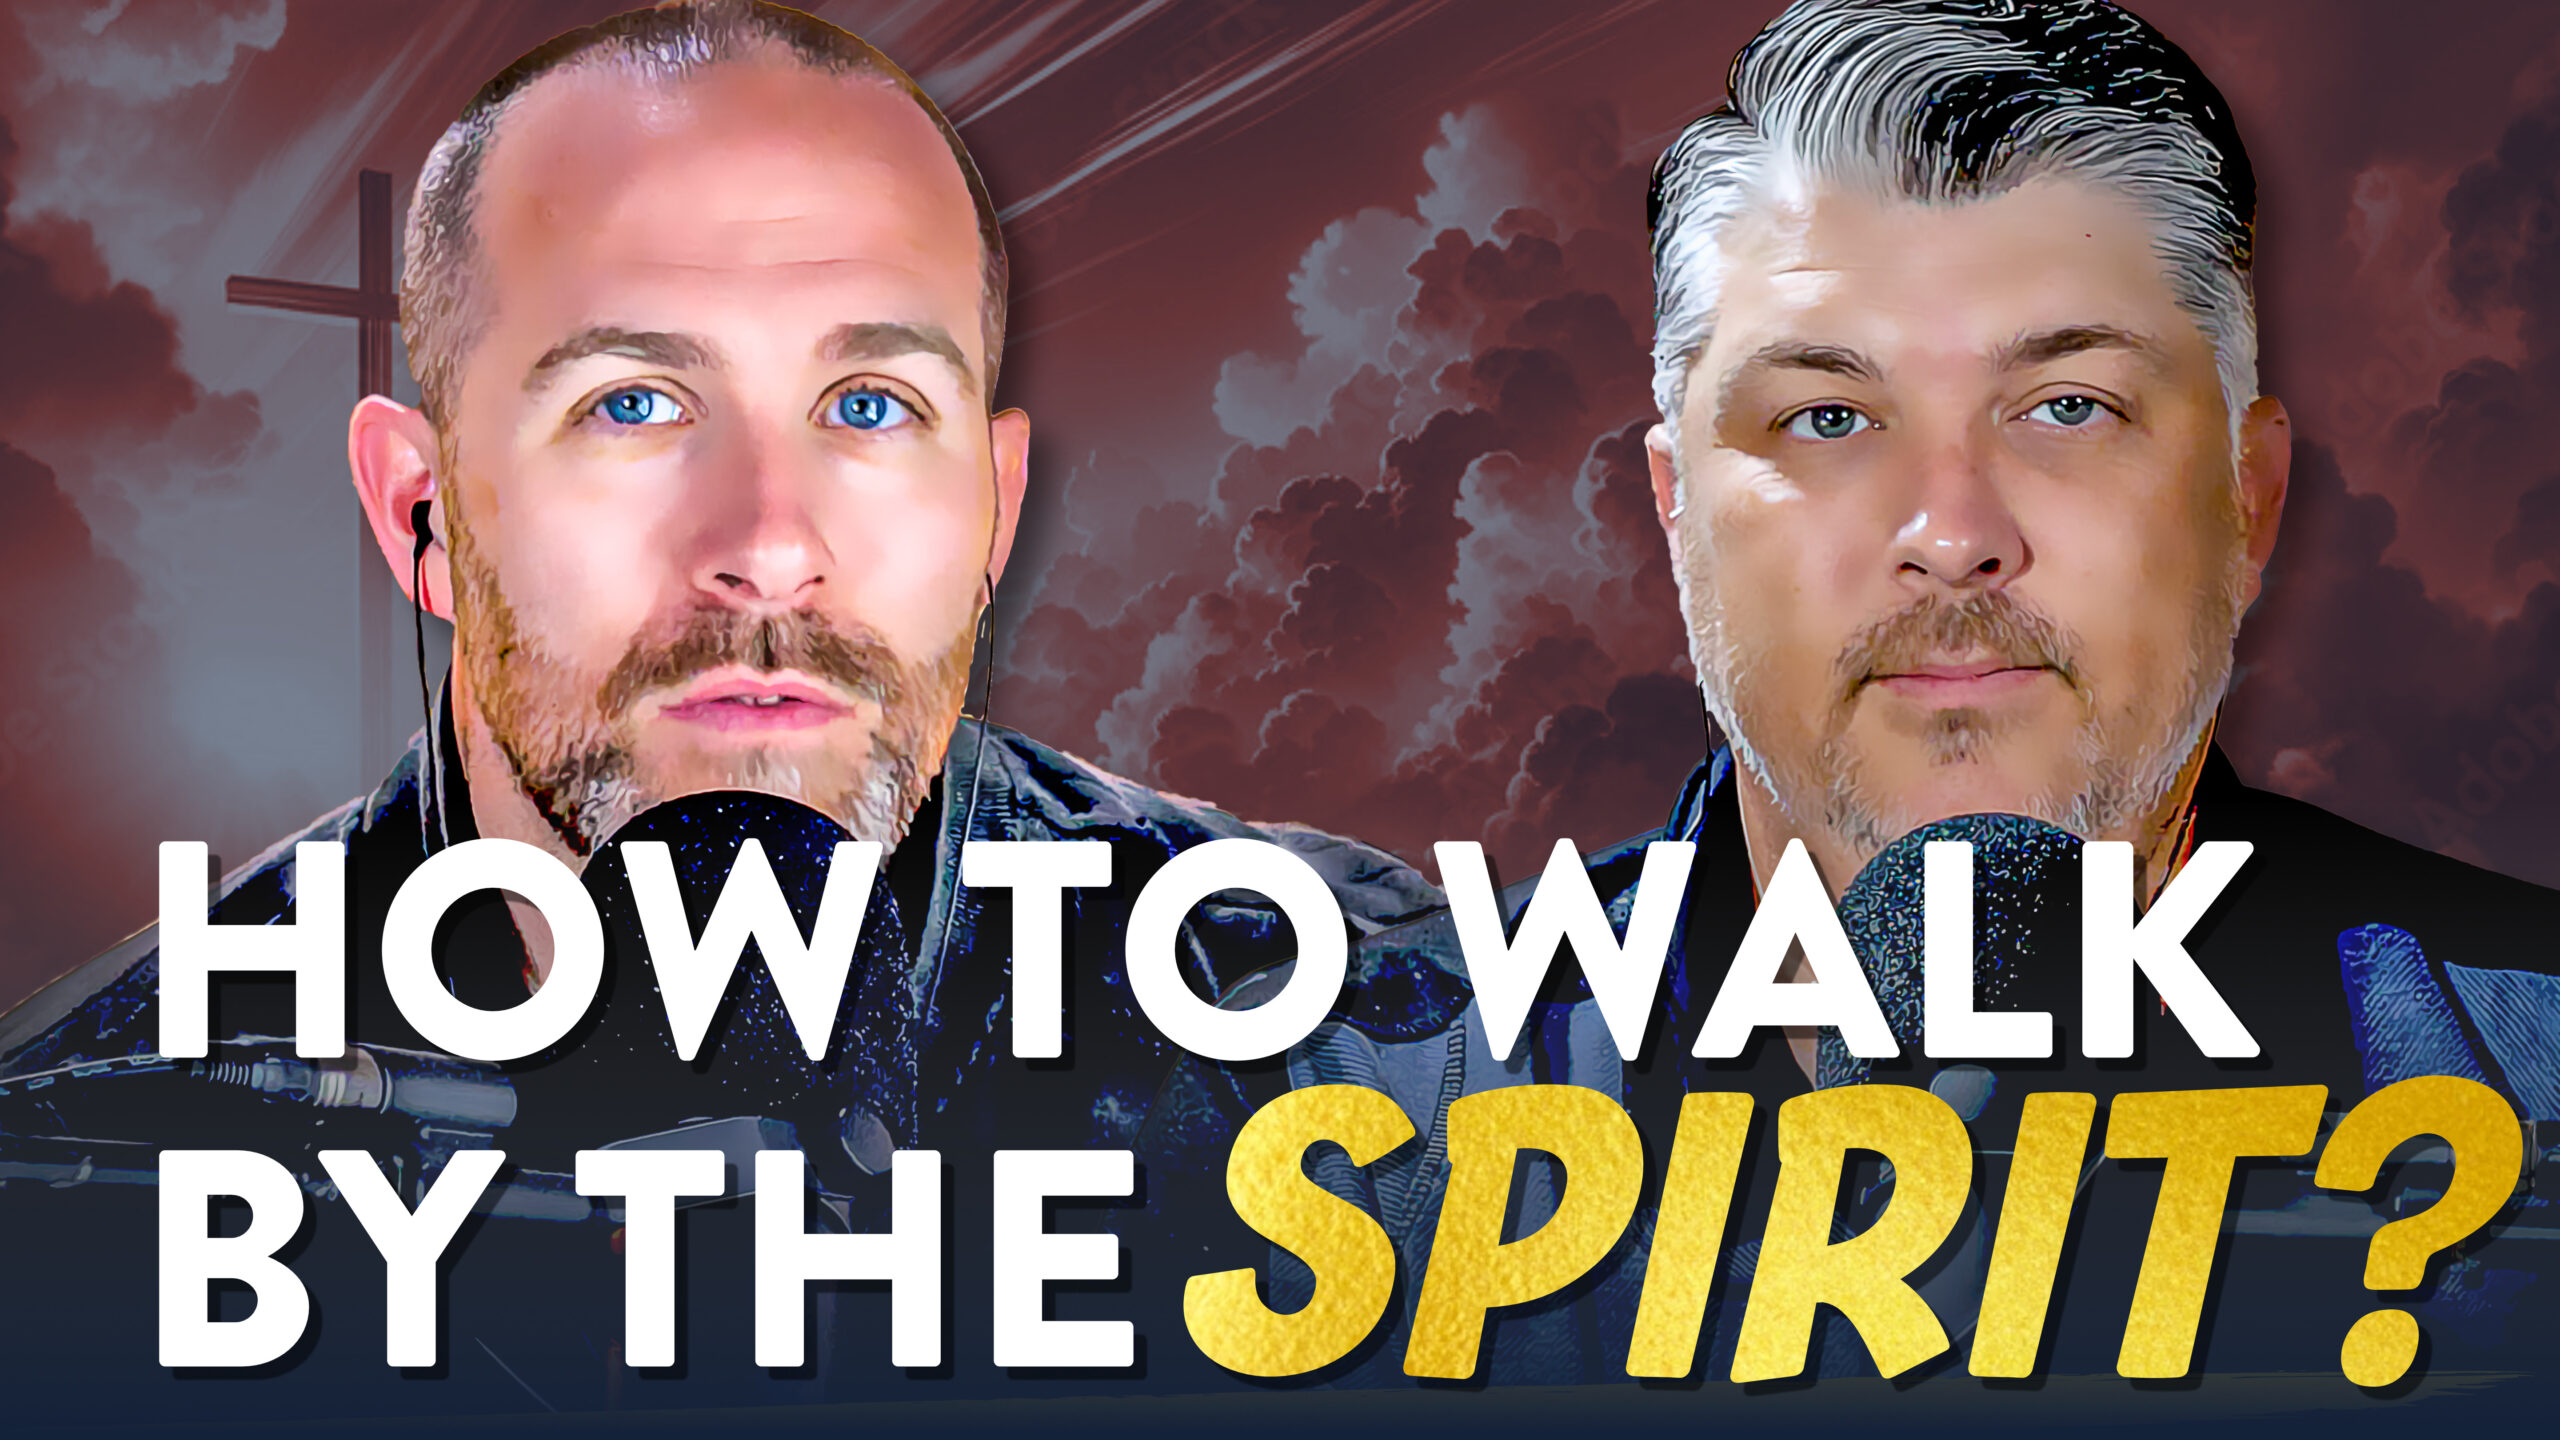 What Does It Mean to Walk by the Spirit?